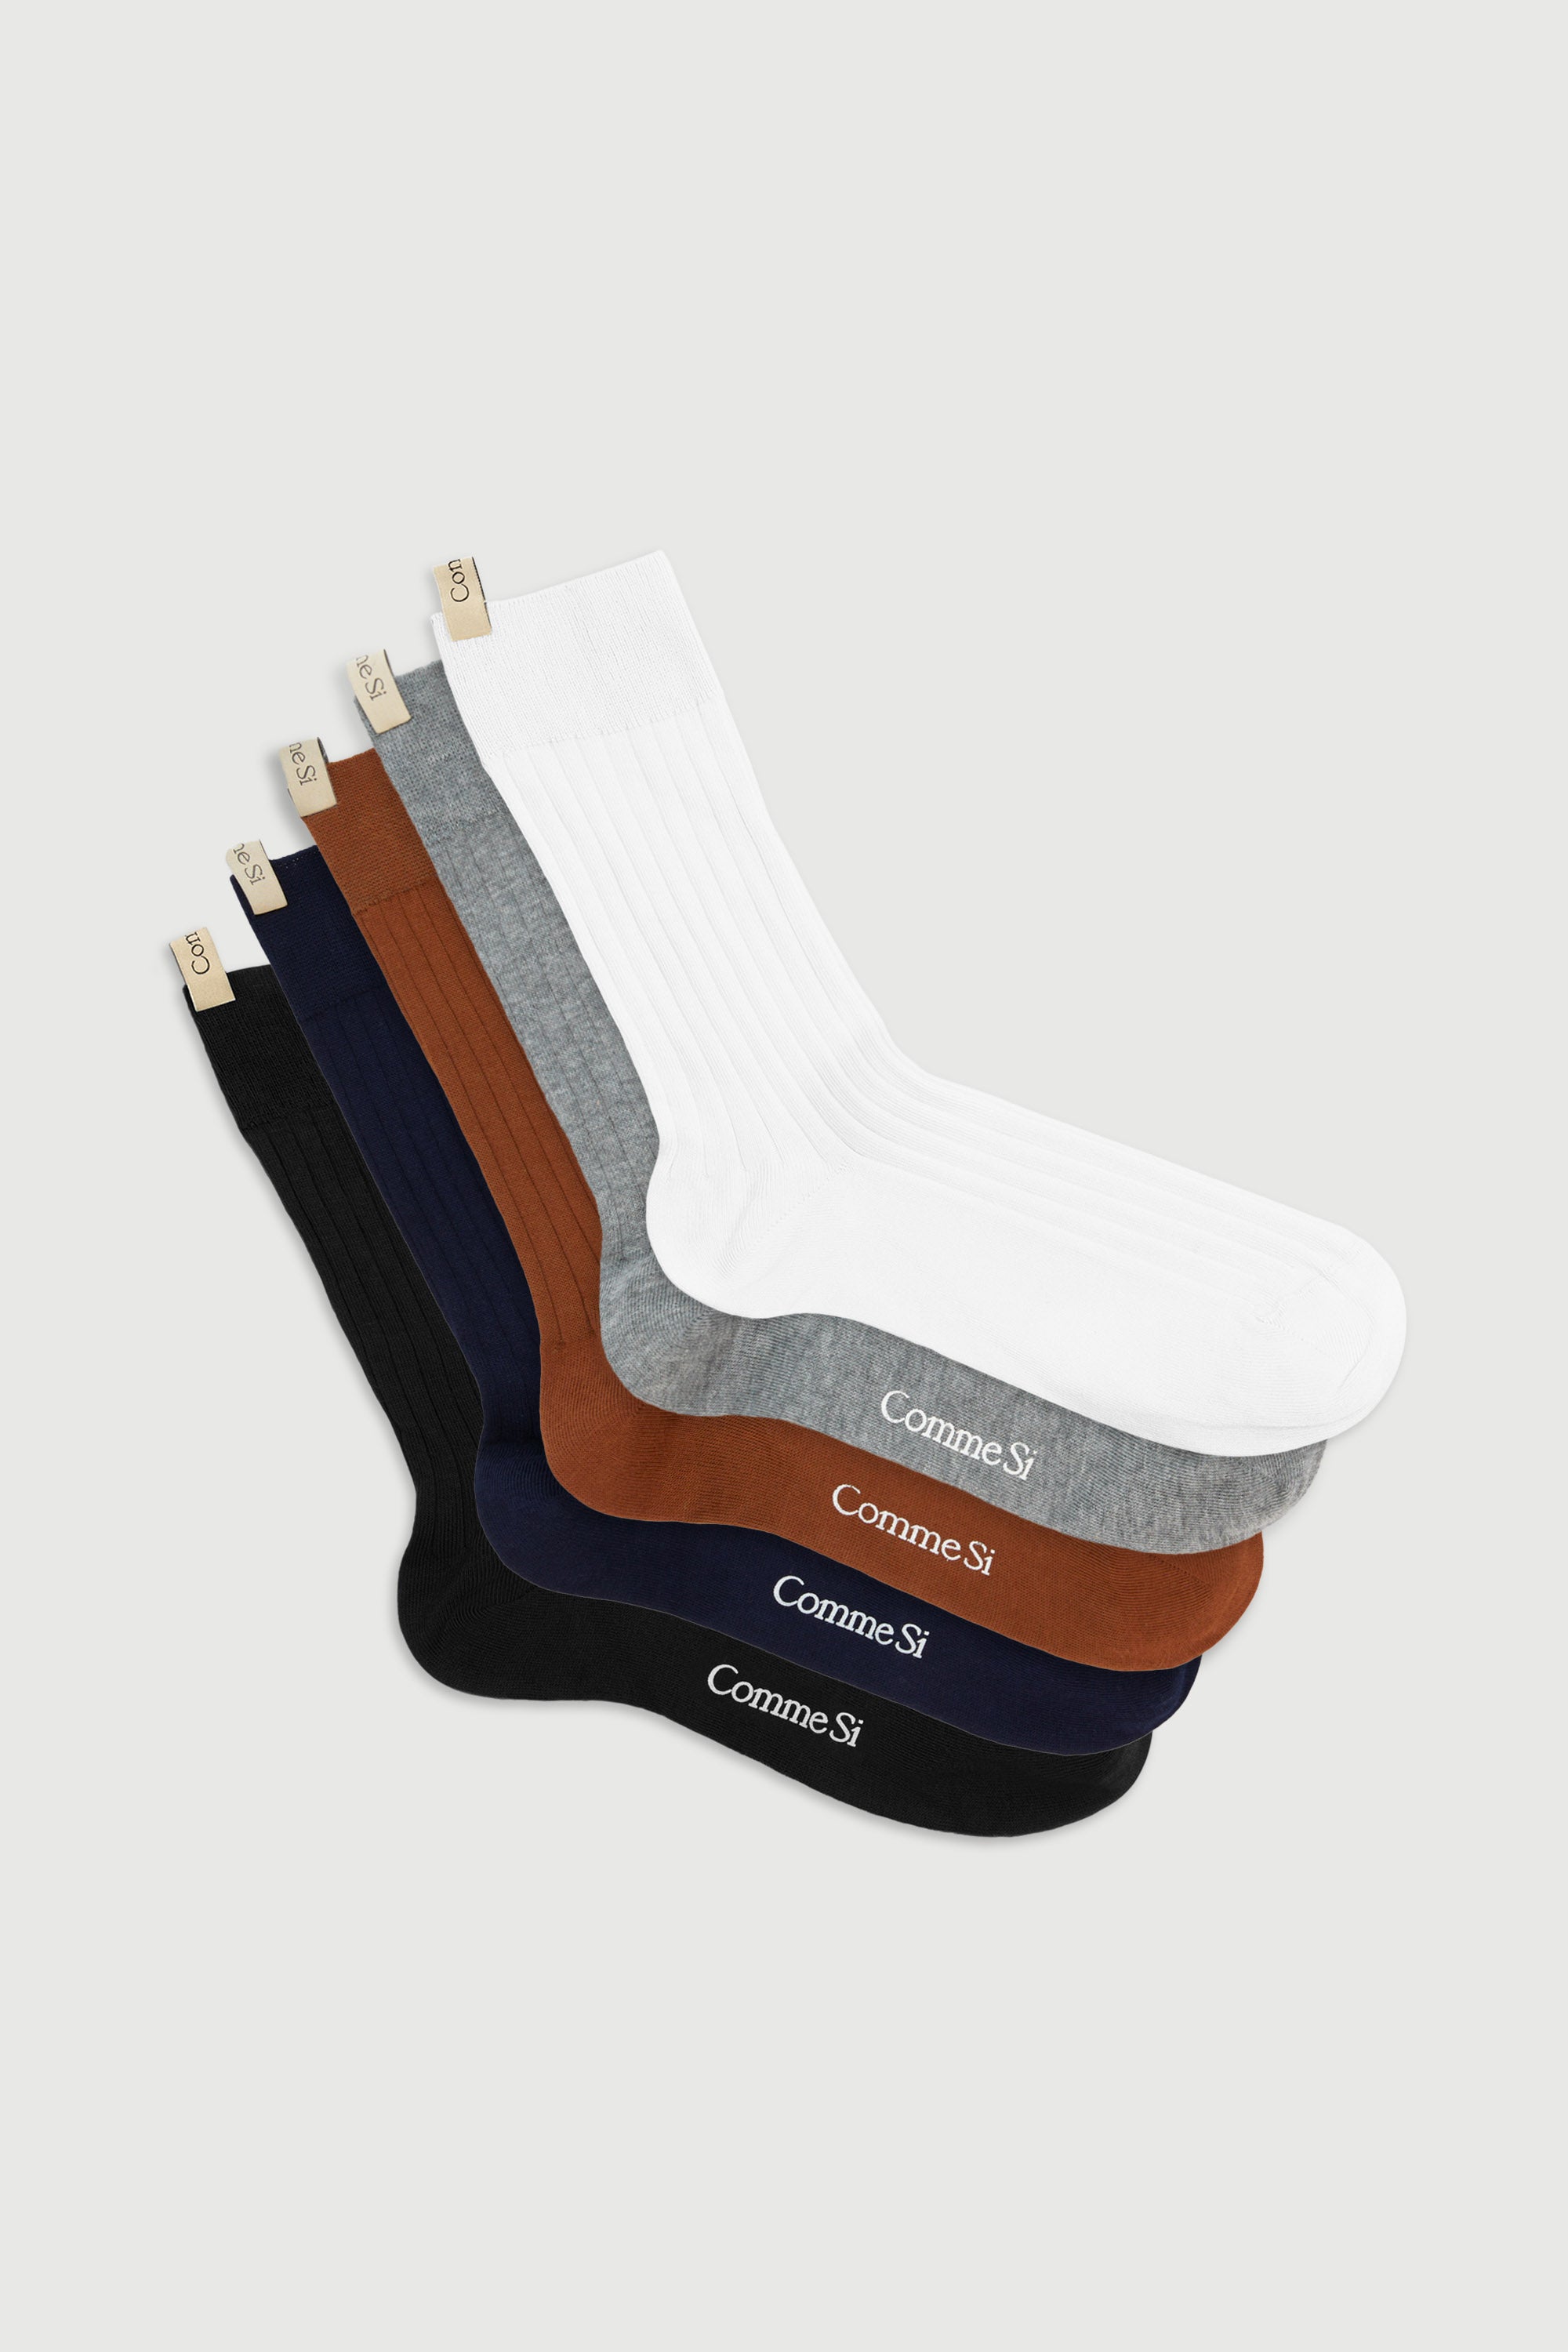 The Yves Cinque Set in Neutral, Neutral sock set, Egyptian Cotton, by Comme Si